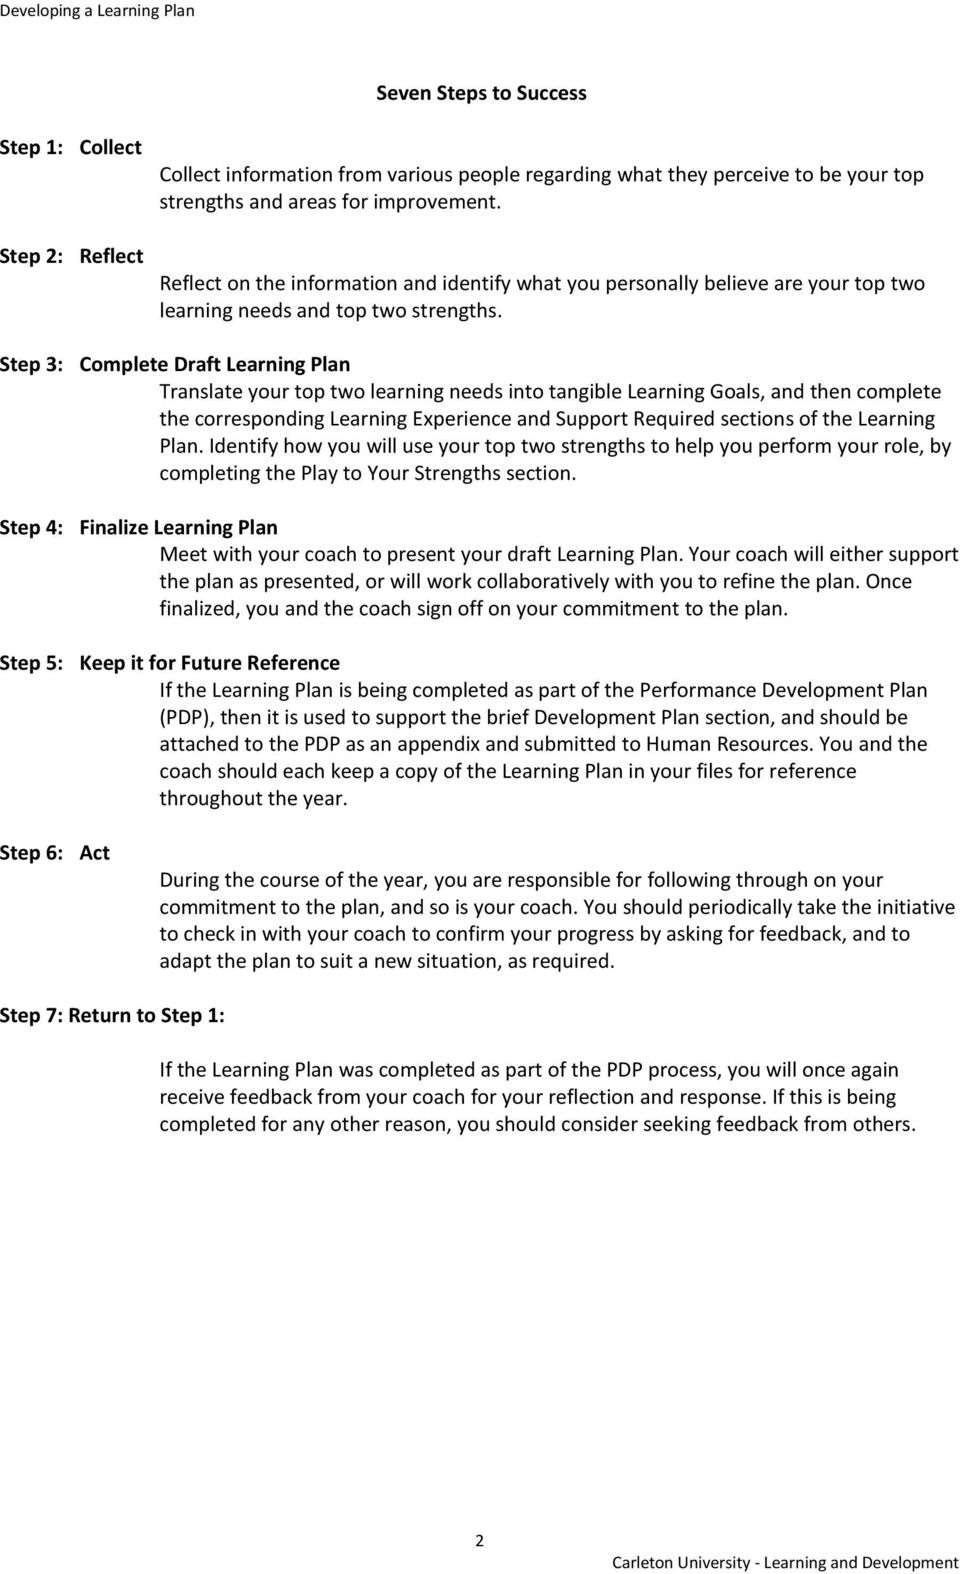 Step 3: Complete Draft Learning Plan Translate your top two learning needs into tangible Learning Goals, and then complete the corresponding Learning Experience and Support Required sections of the